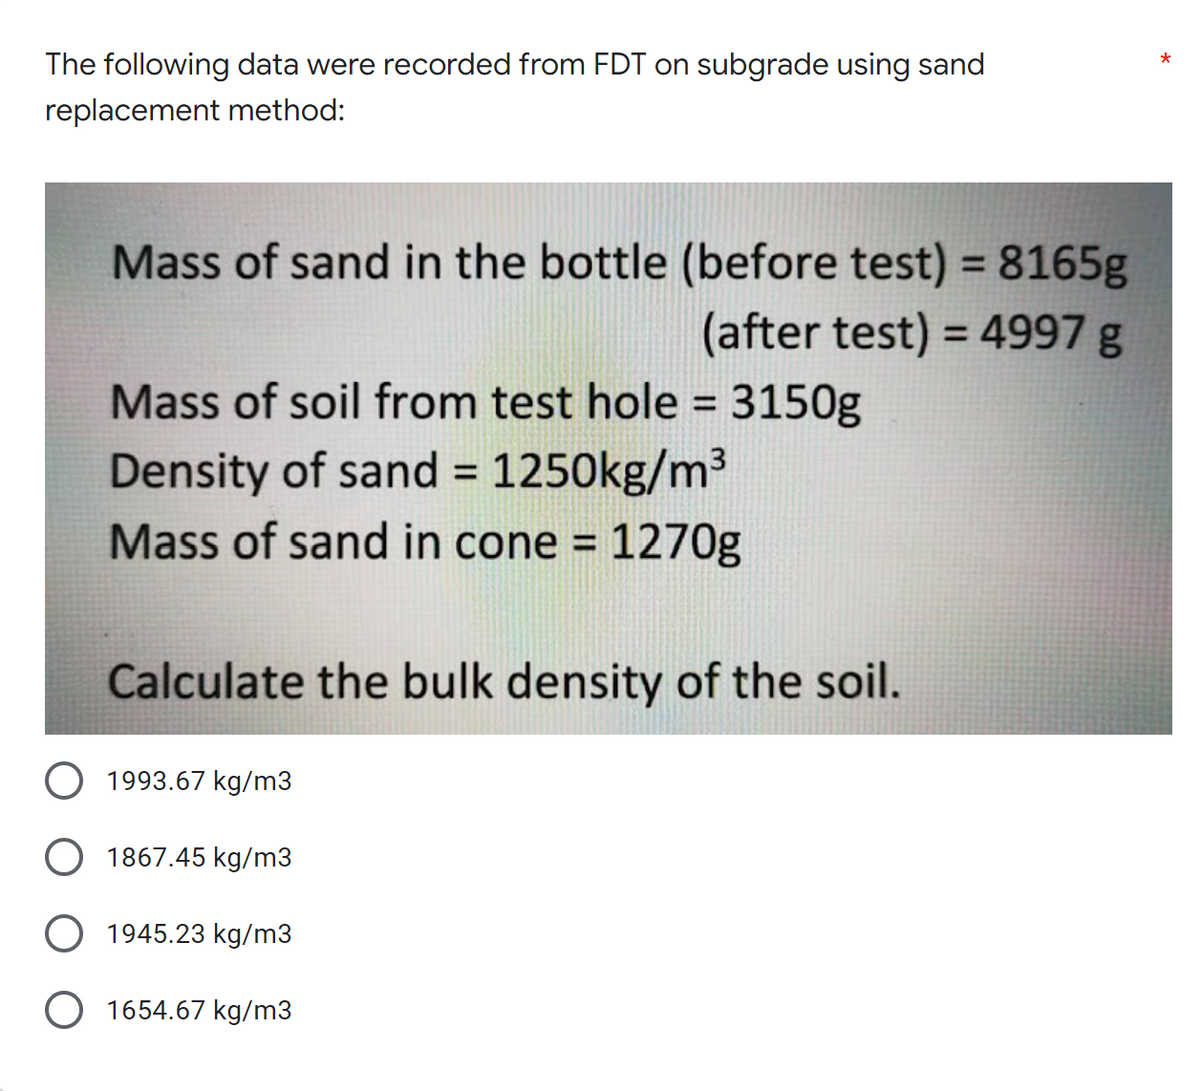 *
The following data were recorded from FDT on subgrade using sand
replacement method:
Mass of sand in the bottle (before test) = 8165g
(after test) = 4997 g
Mass of soil from test hole = 3150g
Density of sand = 1250kg/m³
Mass of sand in cone = 1270g
Calculate the bulk density of the soil.
O 1993.67 kg/m3
1867.45 kg/m3
1945.23 kg/m3
1654.67 kg/m3